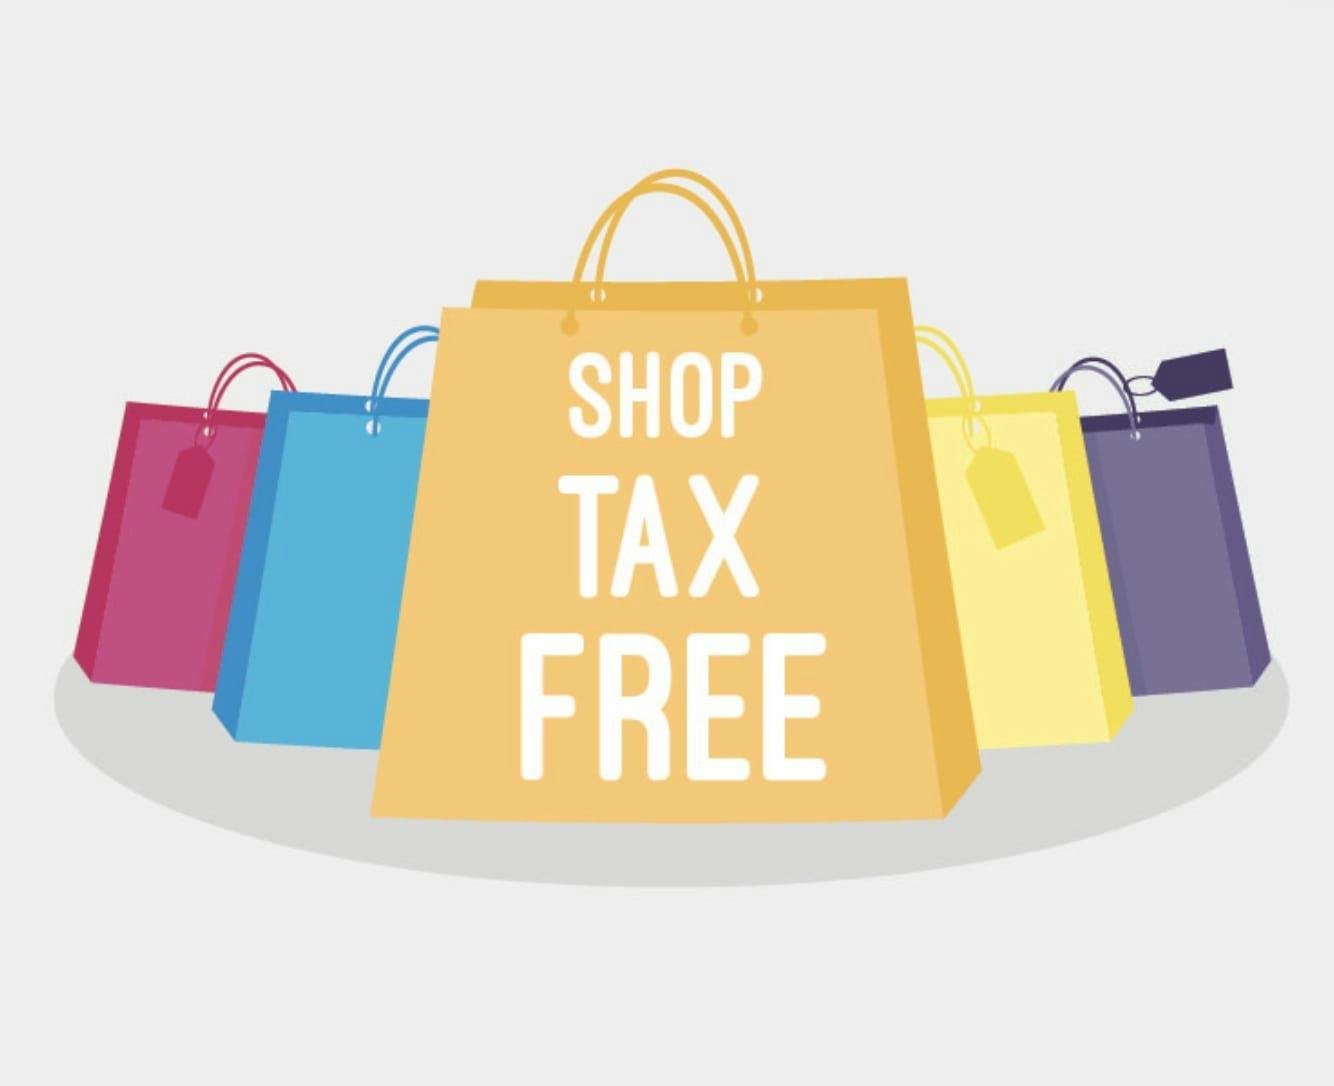 Shopping tax-free with Forwardme